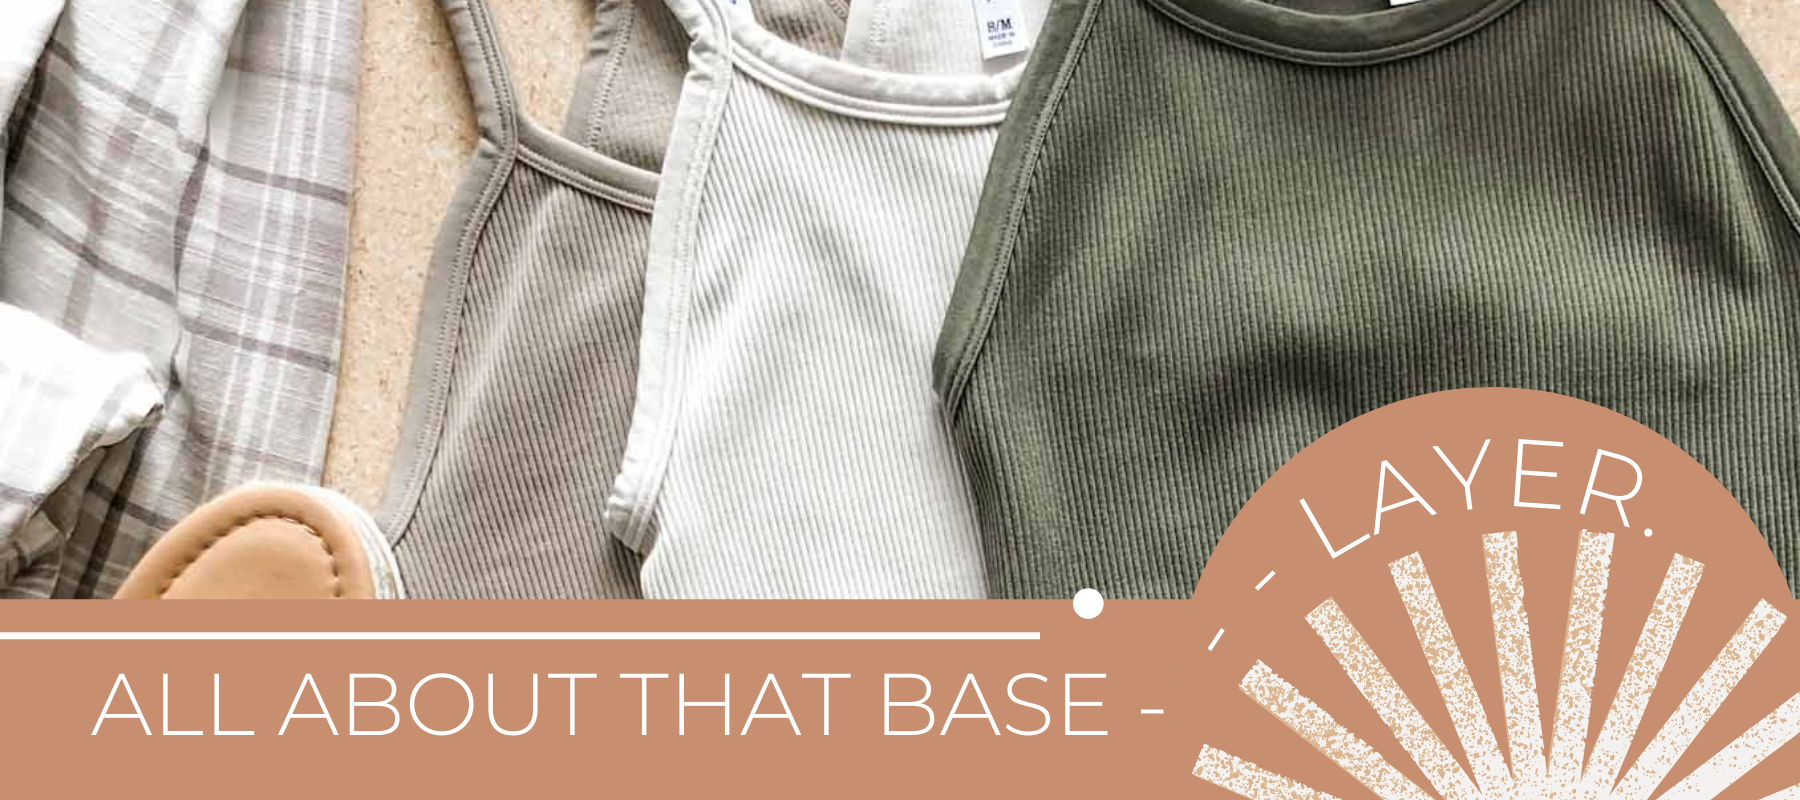 All About That Base - - LAYER!